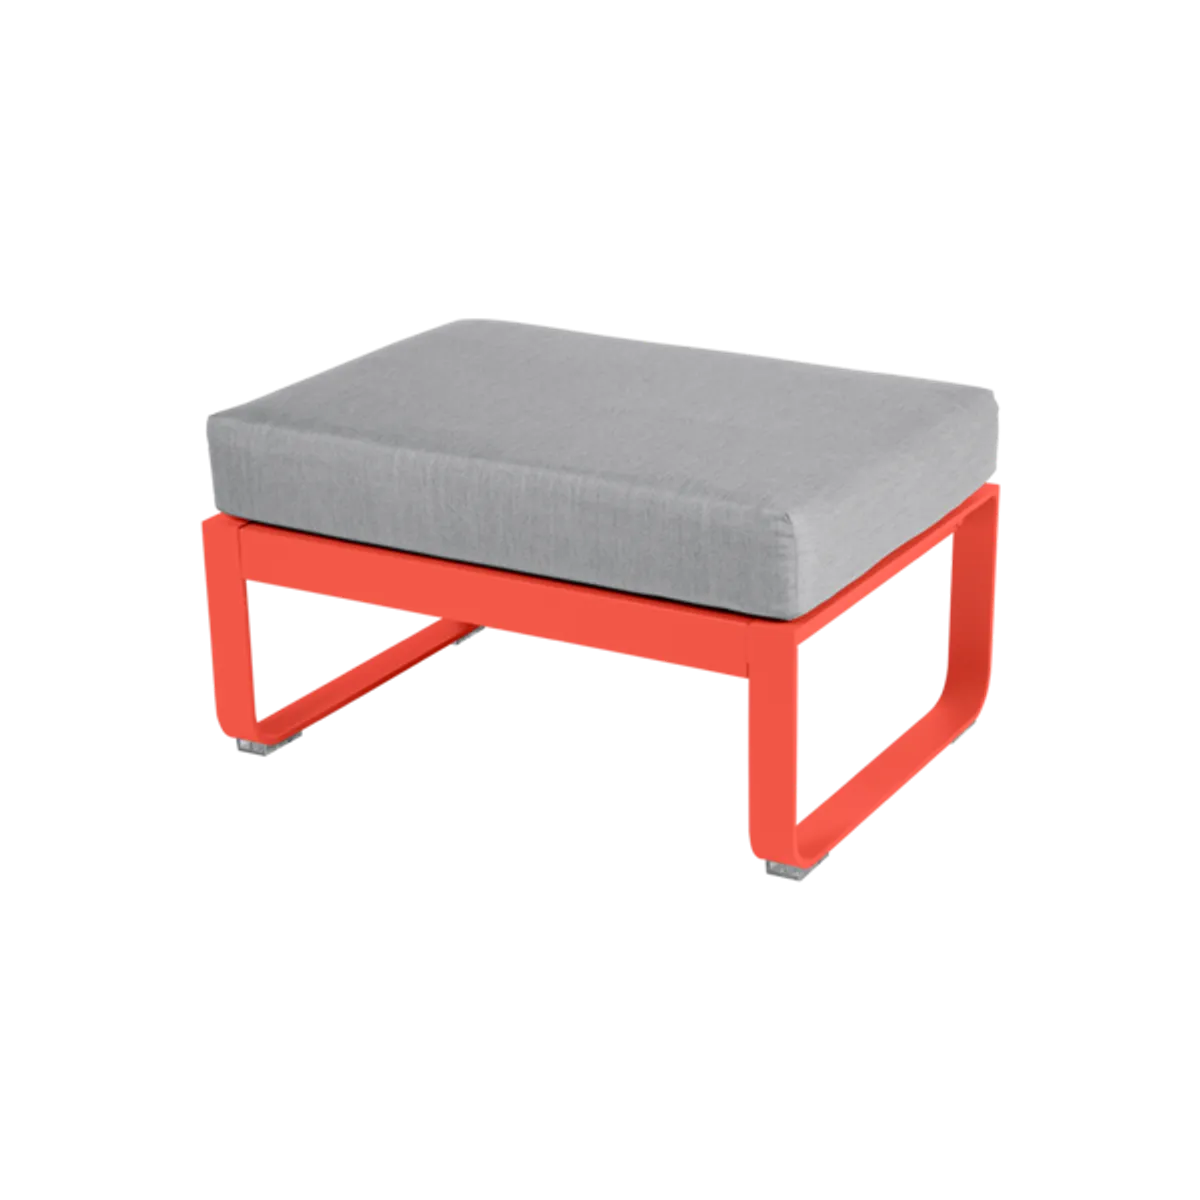 Bellevie small ottoman Inside Out Contracts